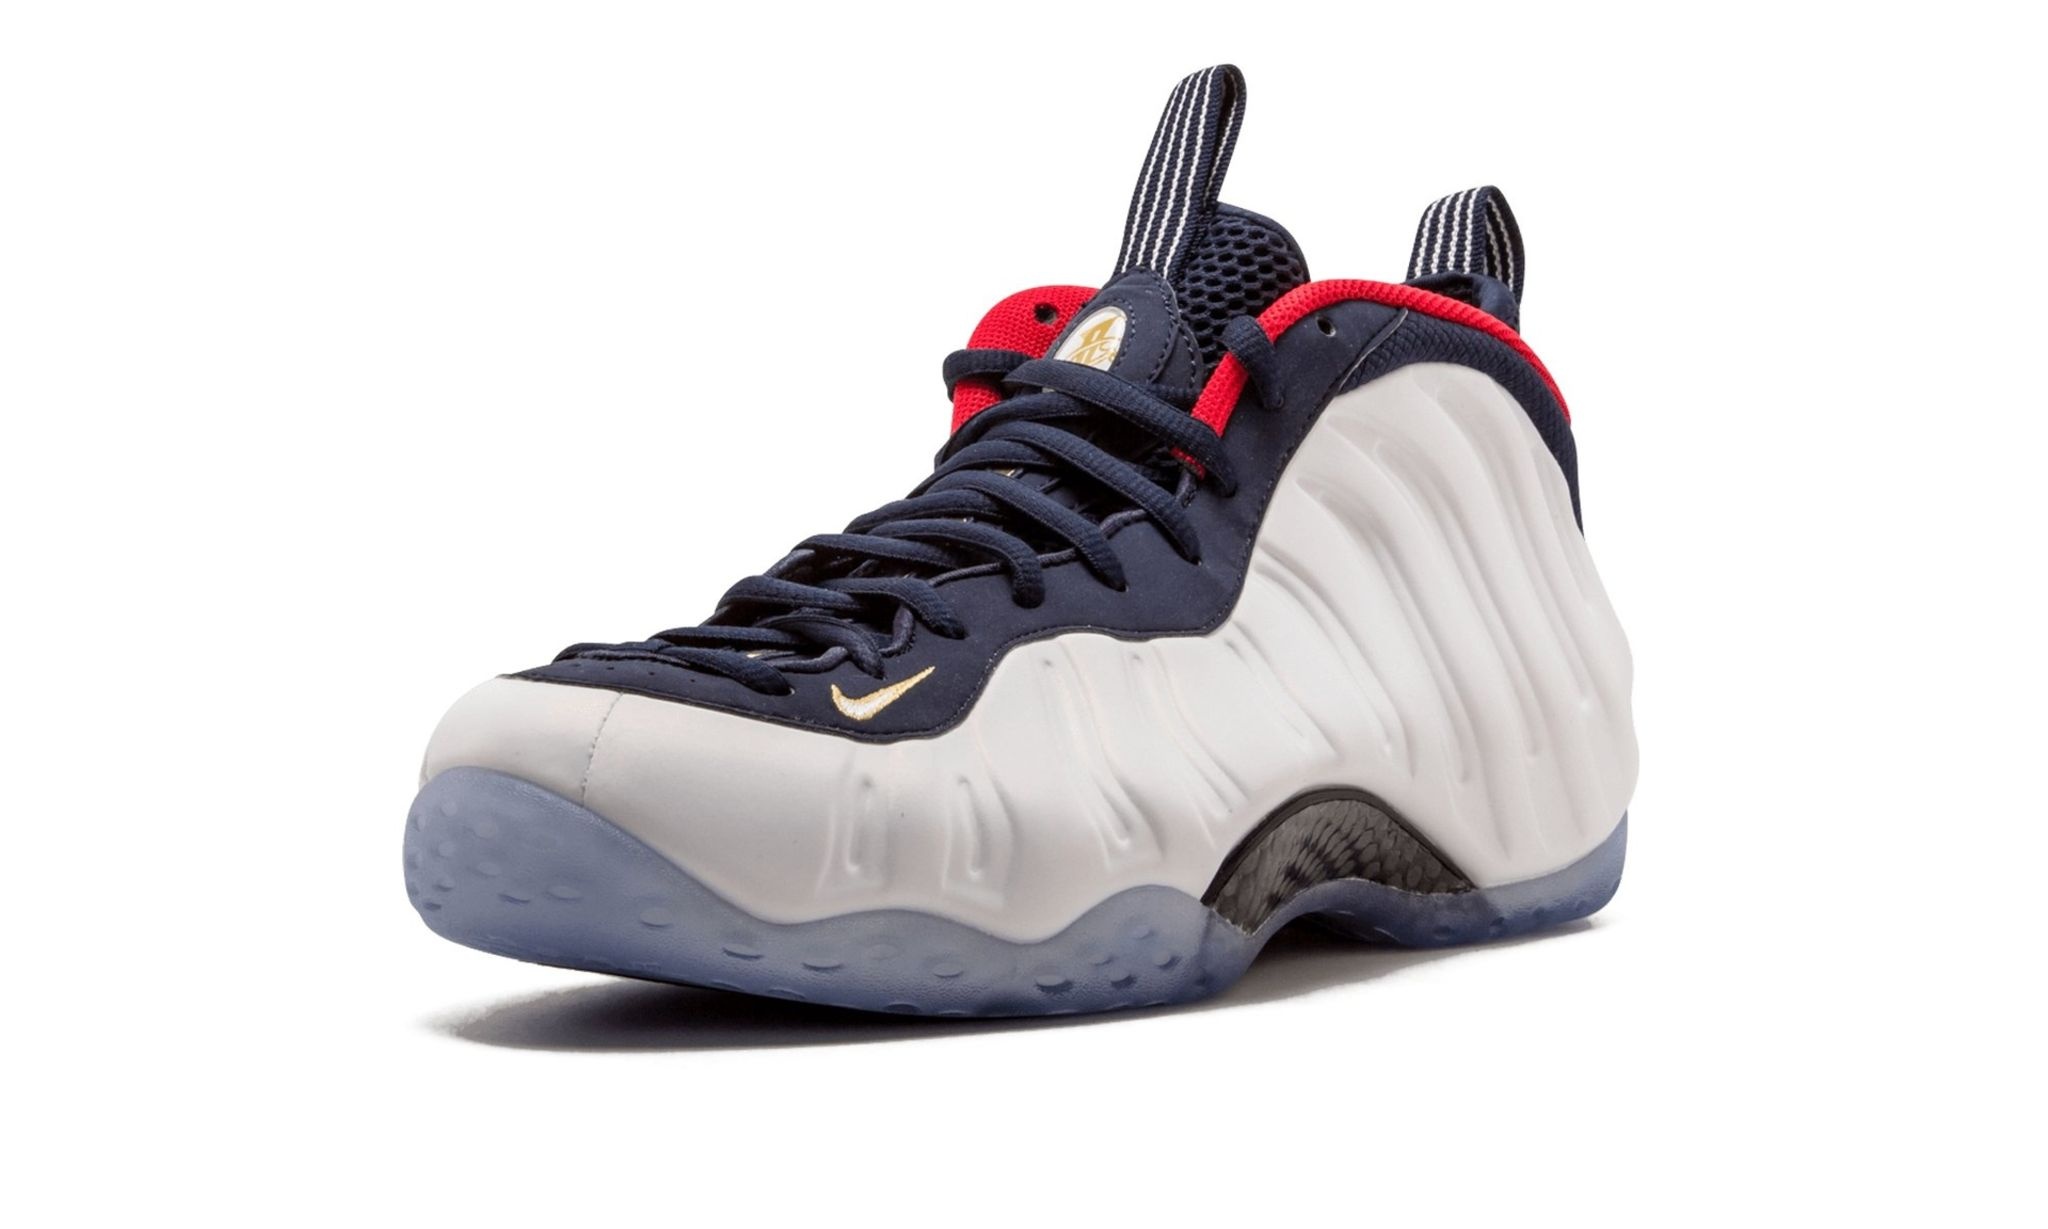 Air Foamposite One PRM "Olympic" - 4